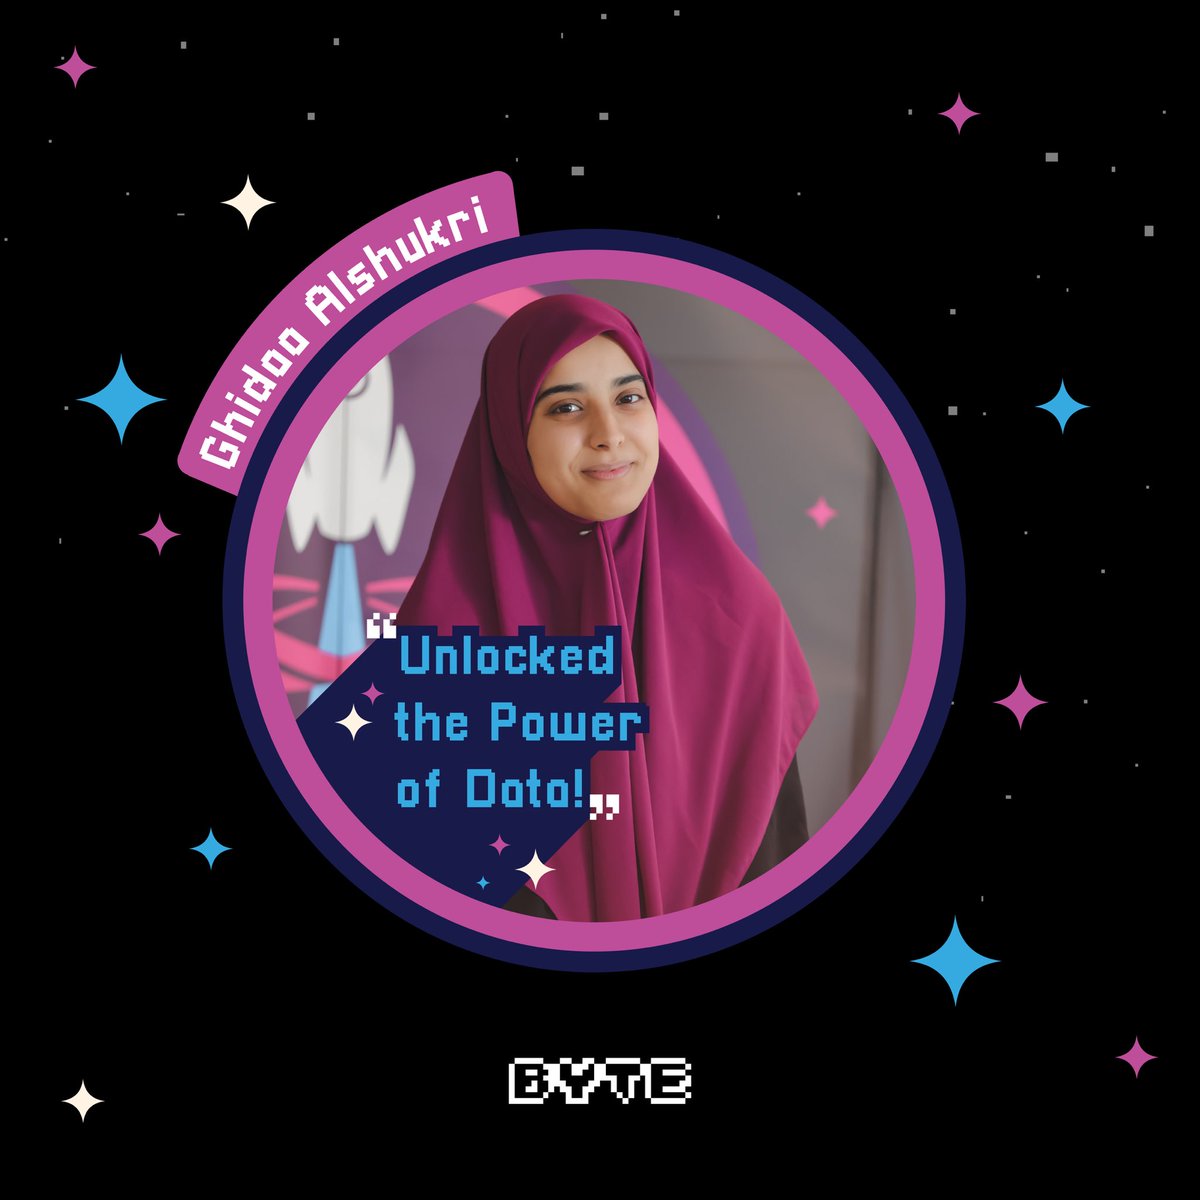 Meet Ghidaa Alshukri, an inspiring participant from TechShip's workshops, here to share her thoughts on this remarkable journey.

#TechShip 🚀
Welcome Aboard!
Funded by US State Department through Alumni Engagement Innovation Fund (AEIF)